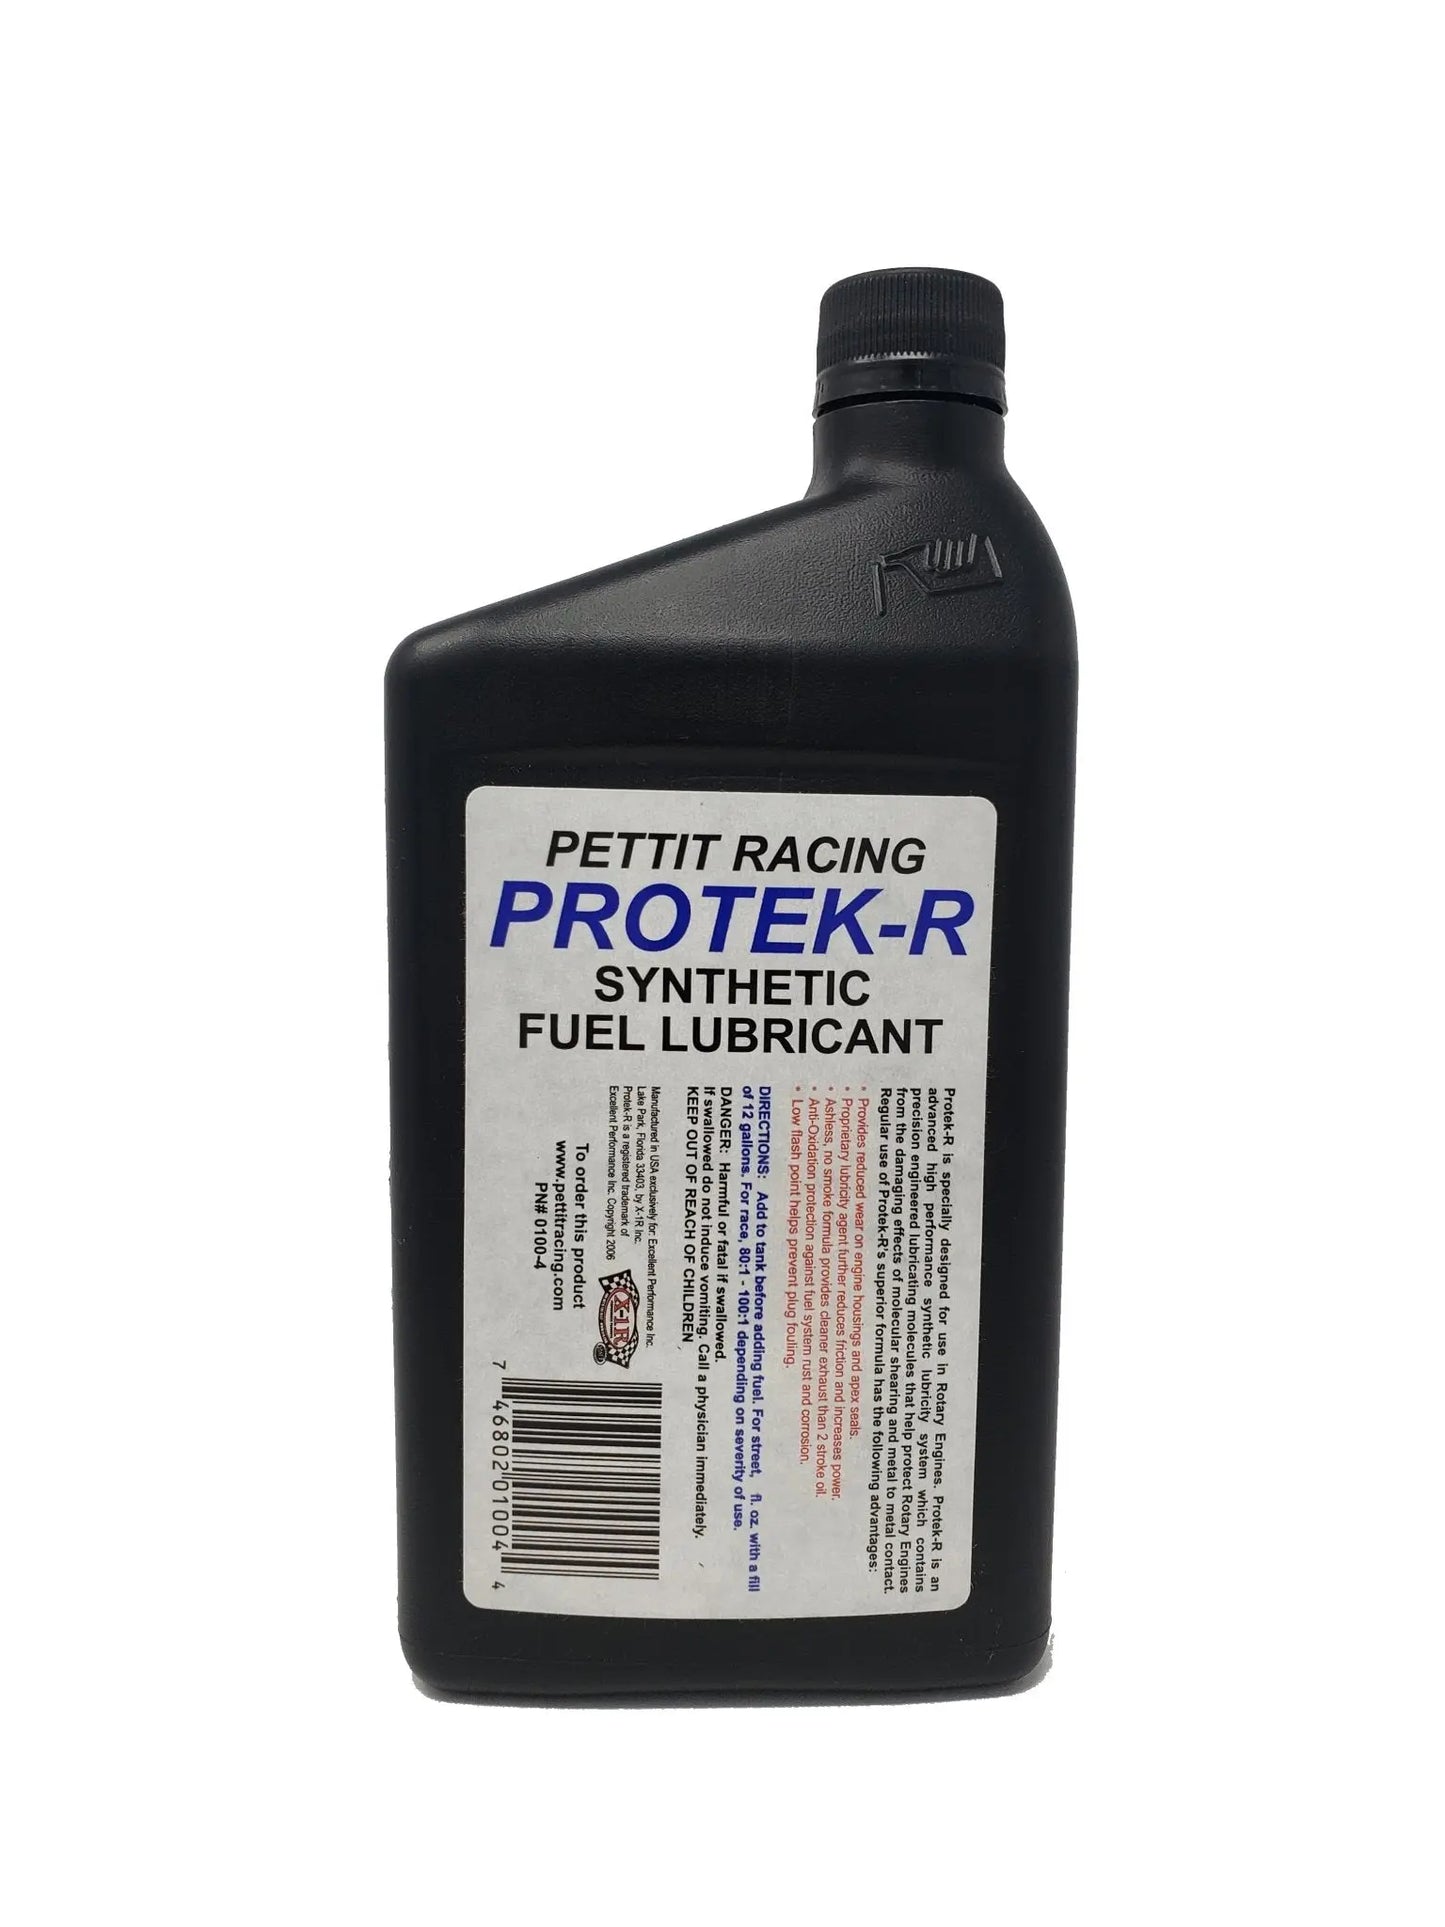 Protek-R Rotary Fuel Lubricant by GT Champions Pettit Racing - Pettit Racing